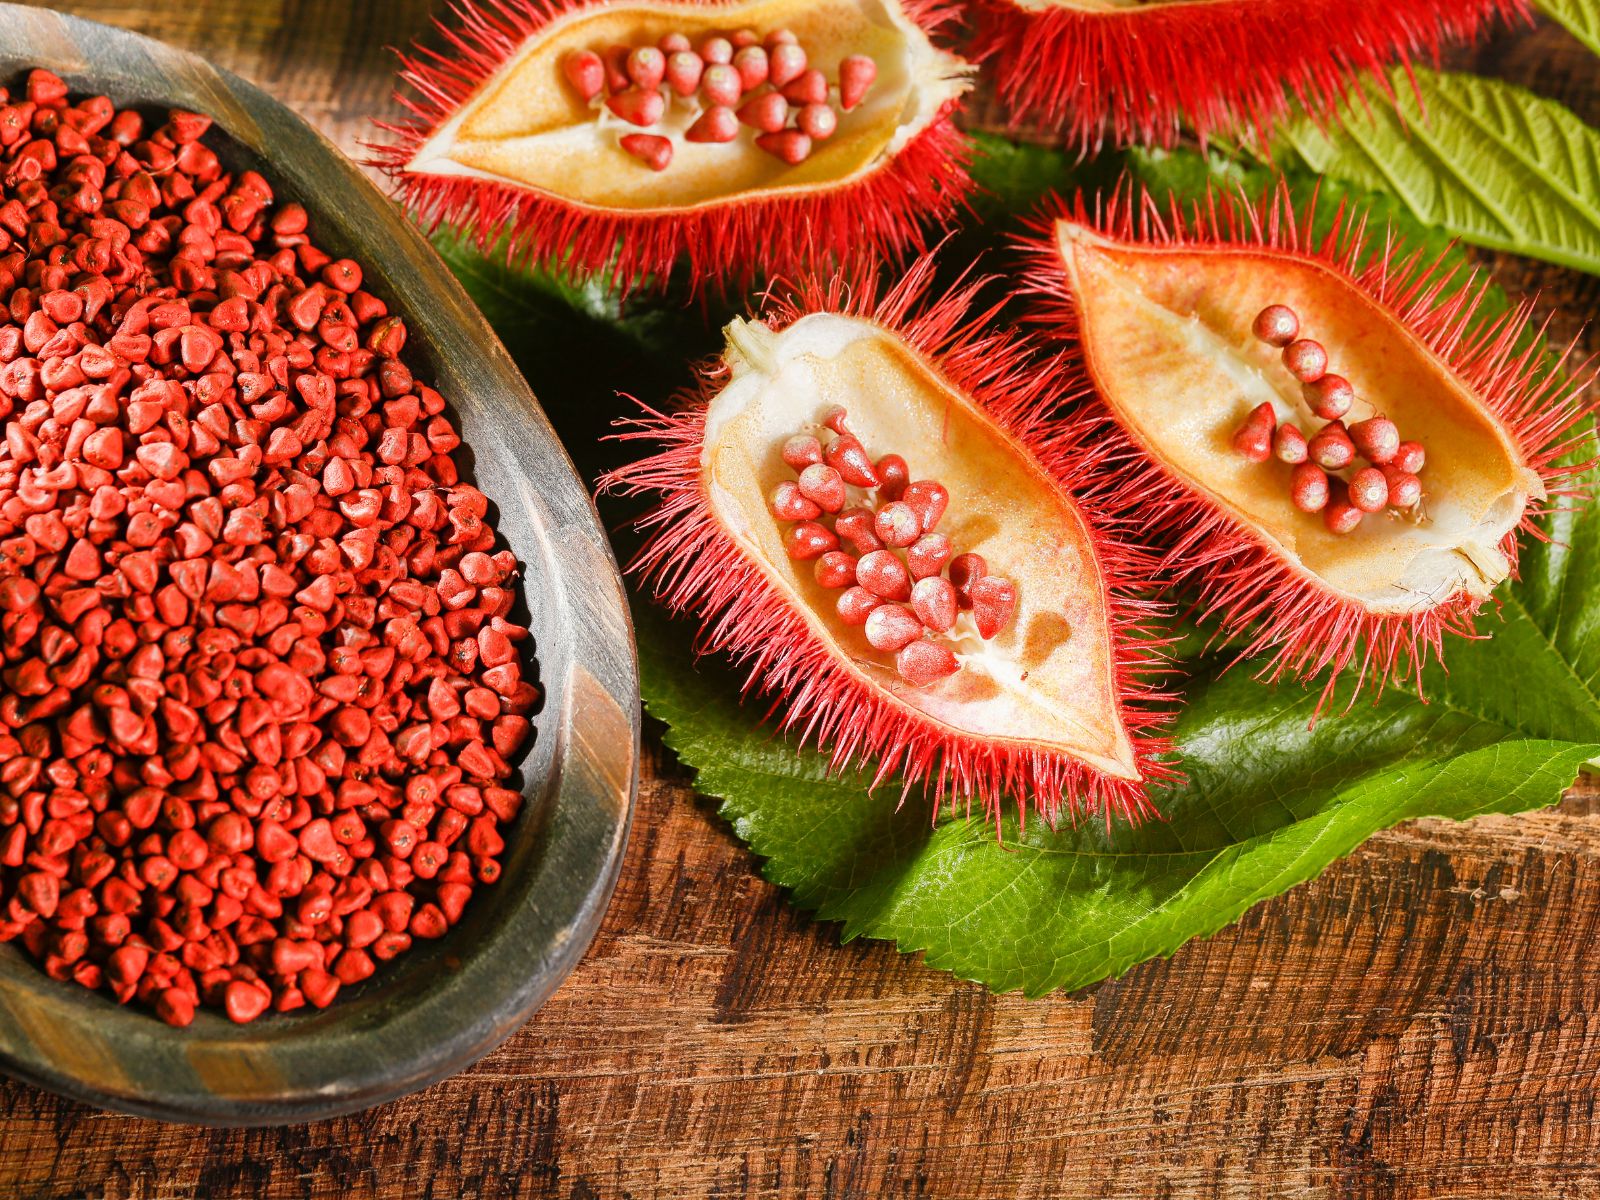 Annatto seeds and fruit